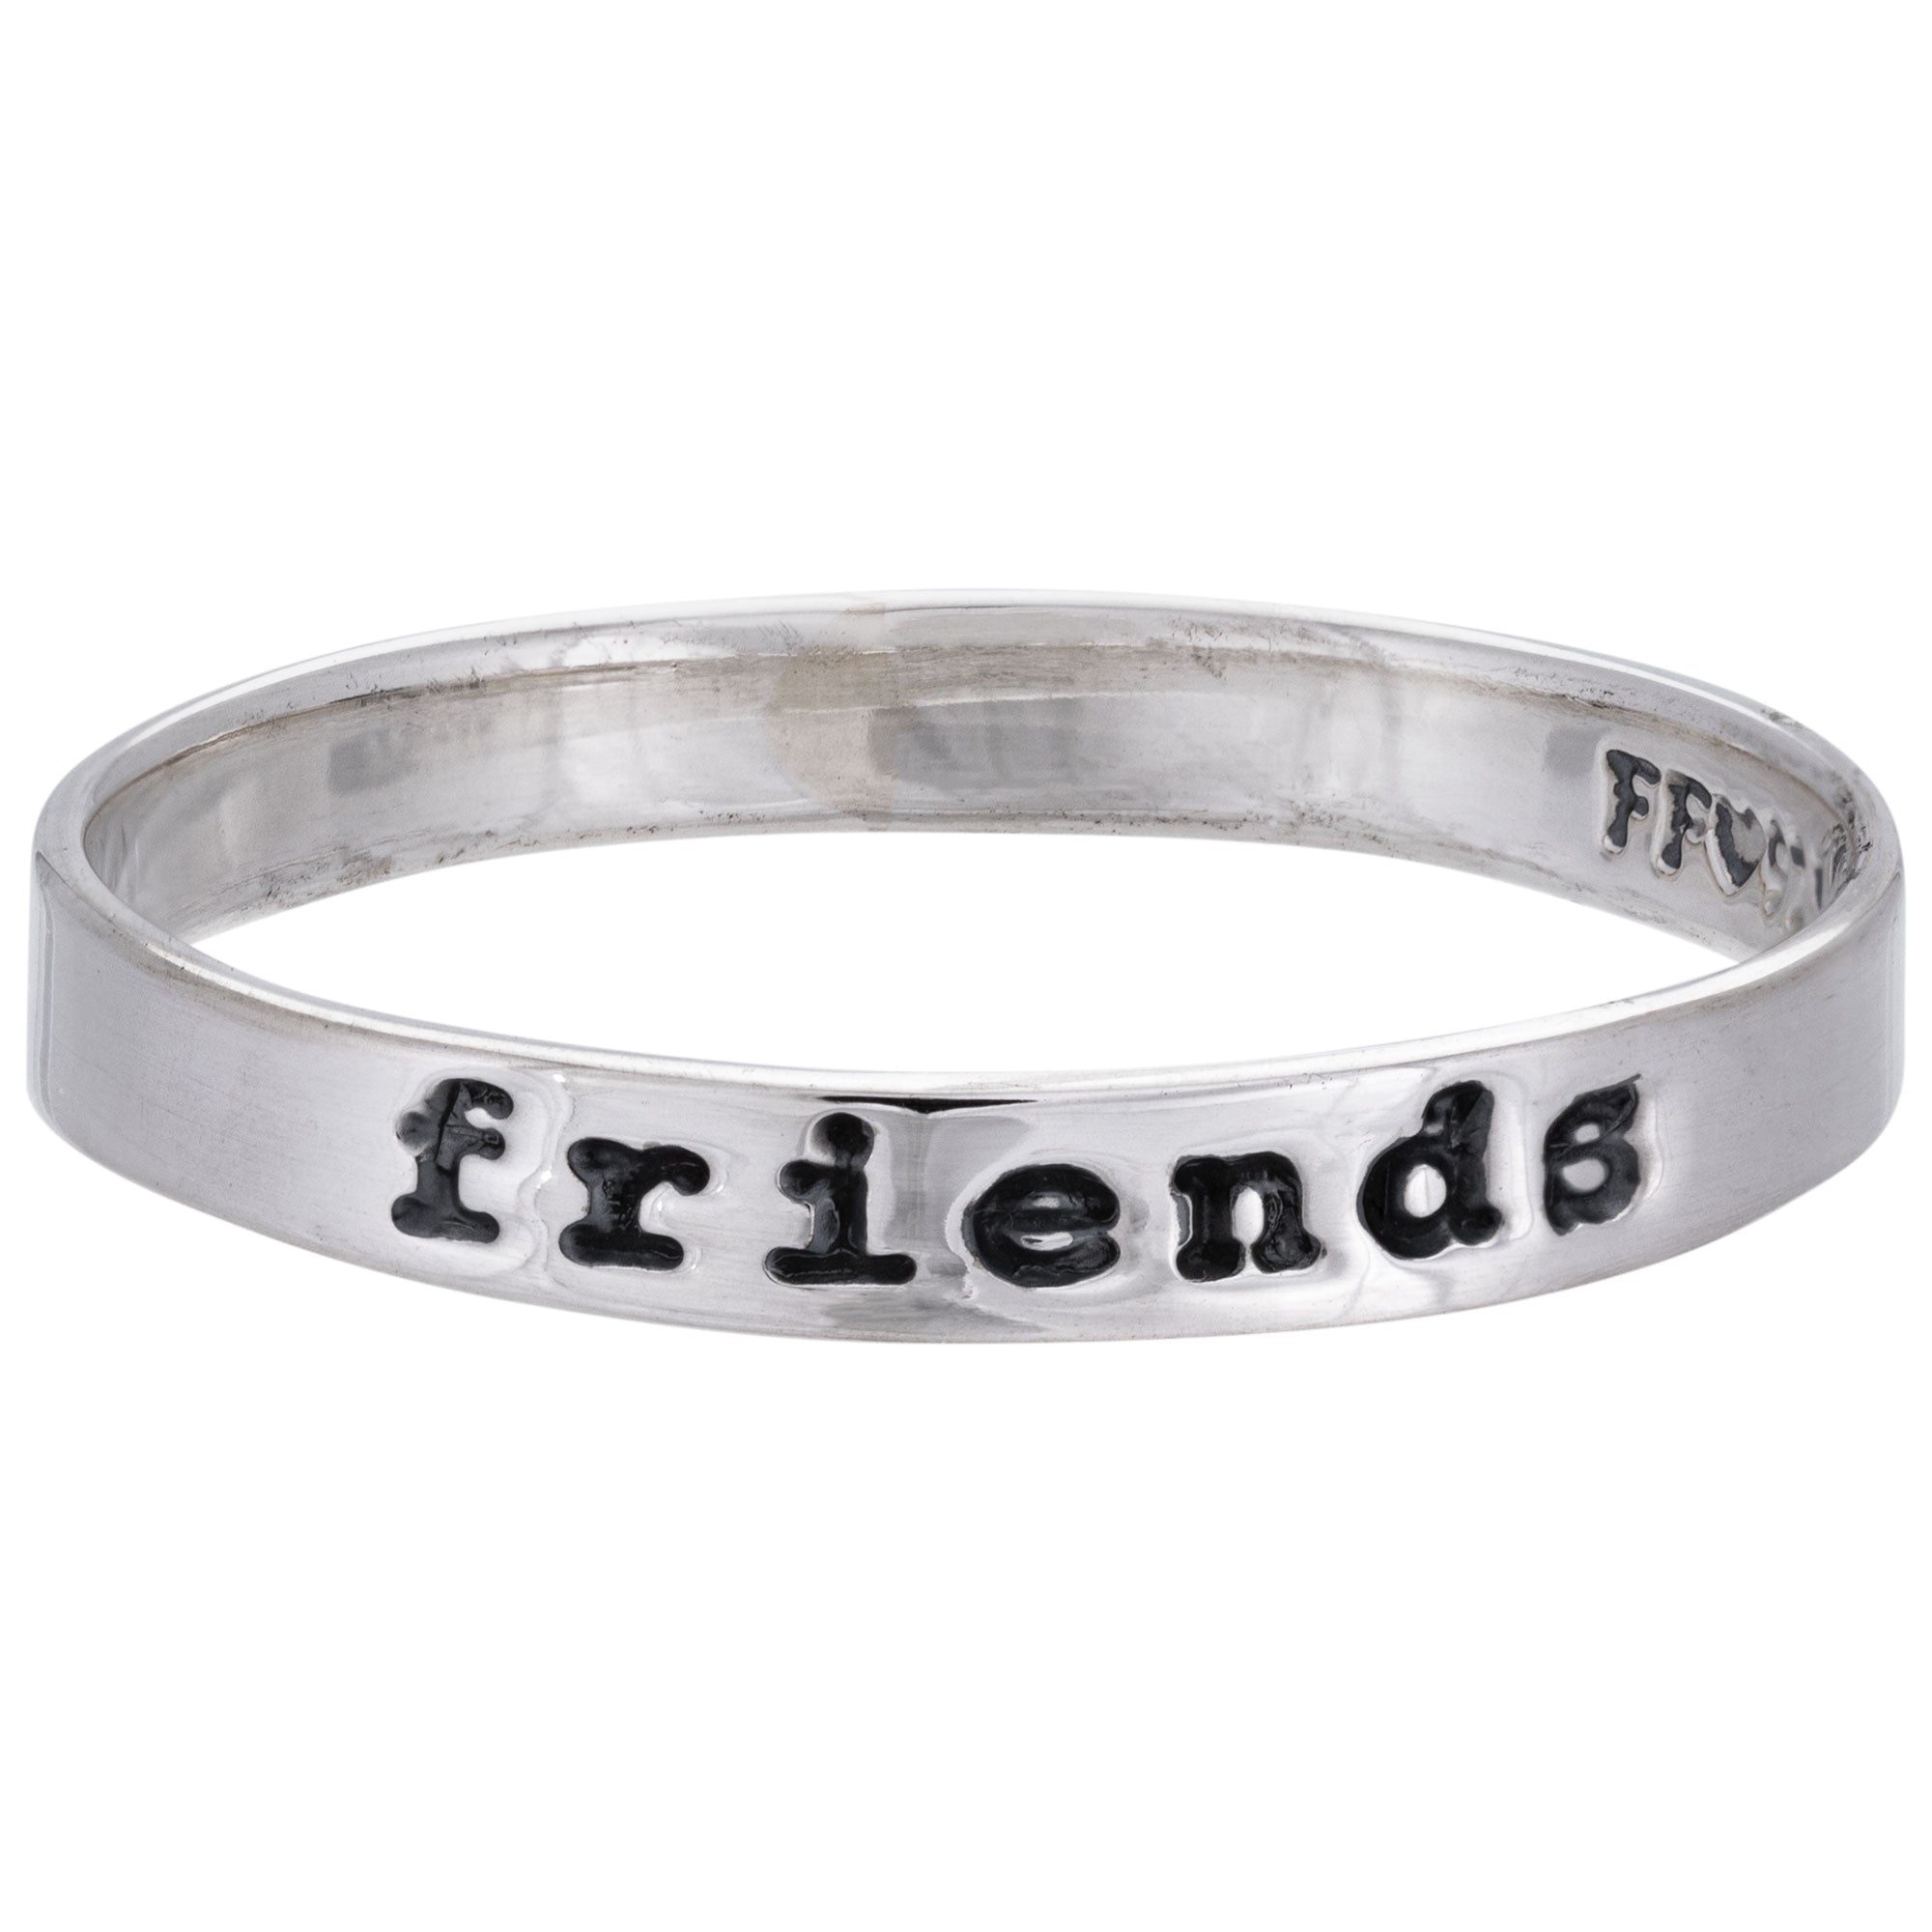 Friends Sterling Silver Ring - 6